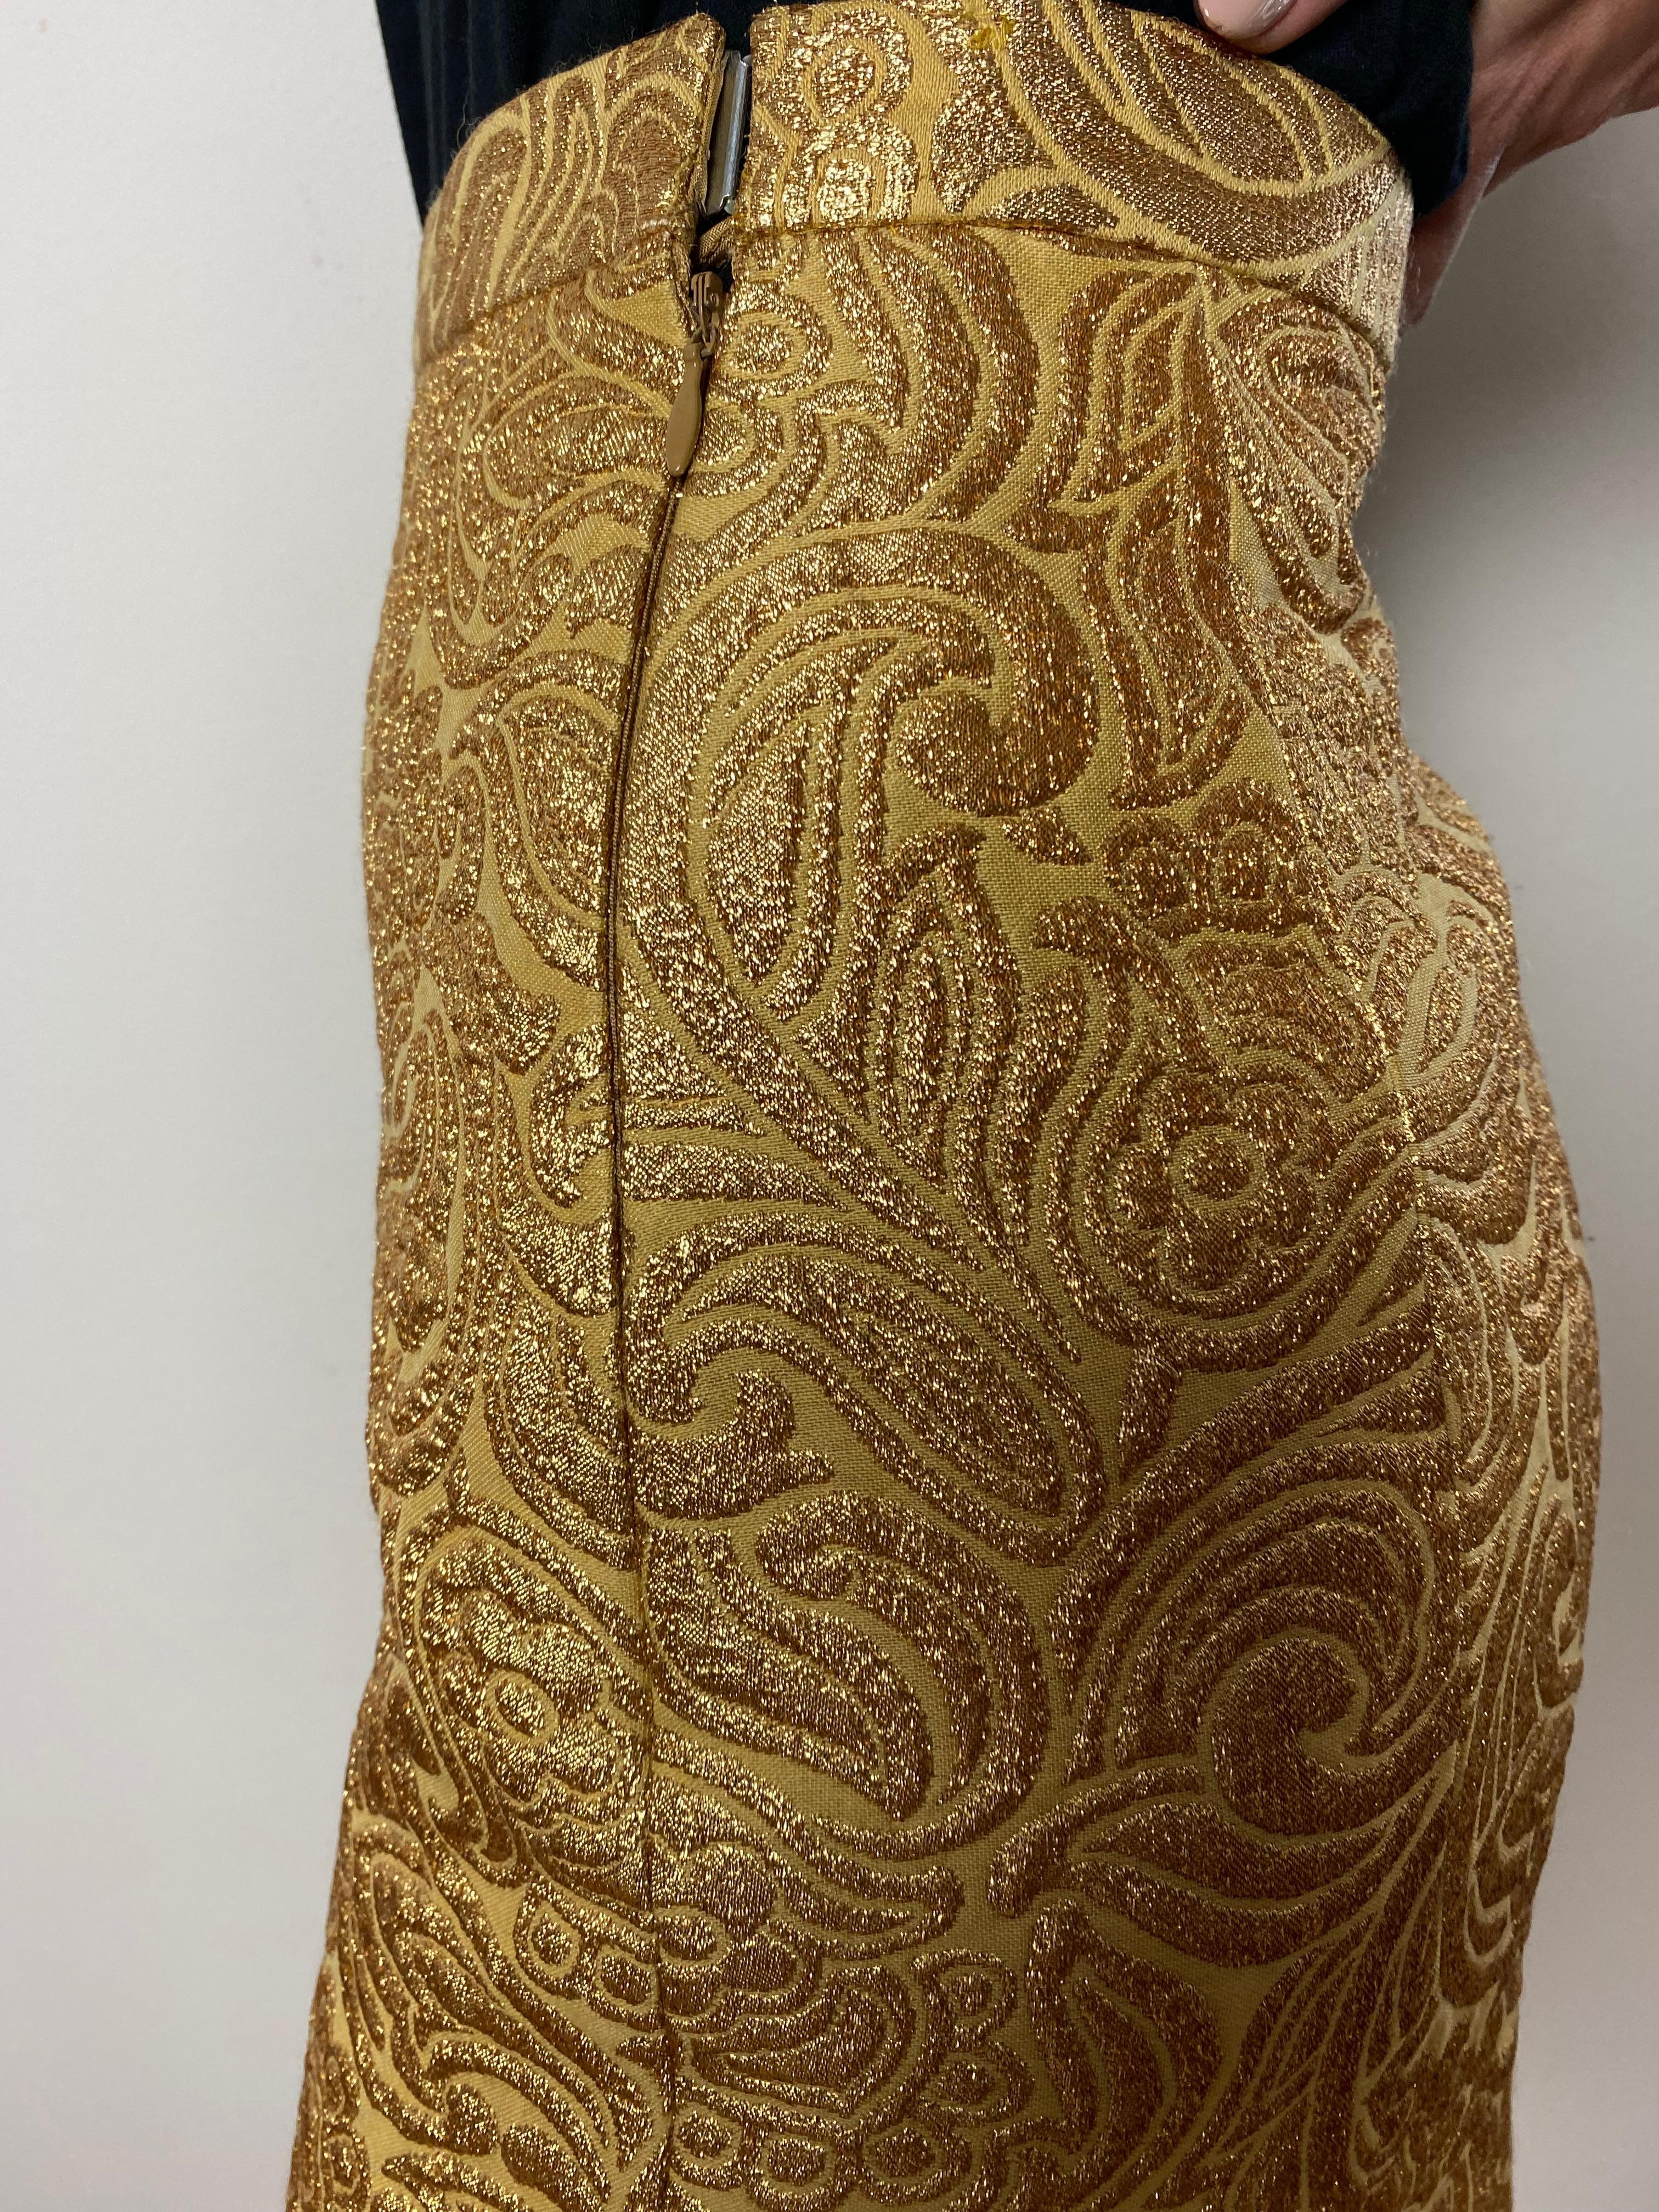 YSL gold brocade suit For Sale 2